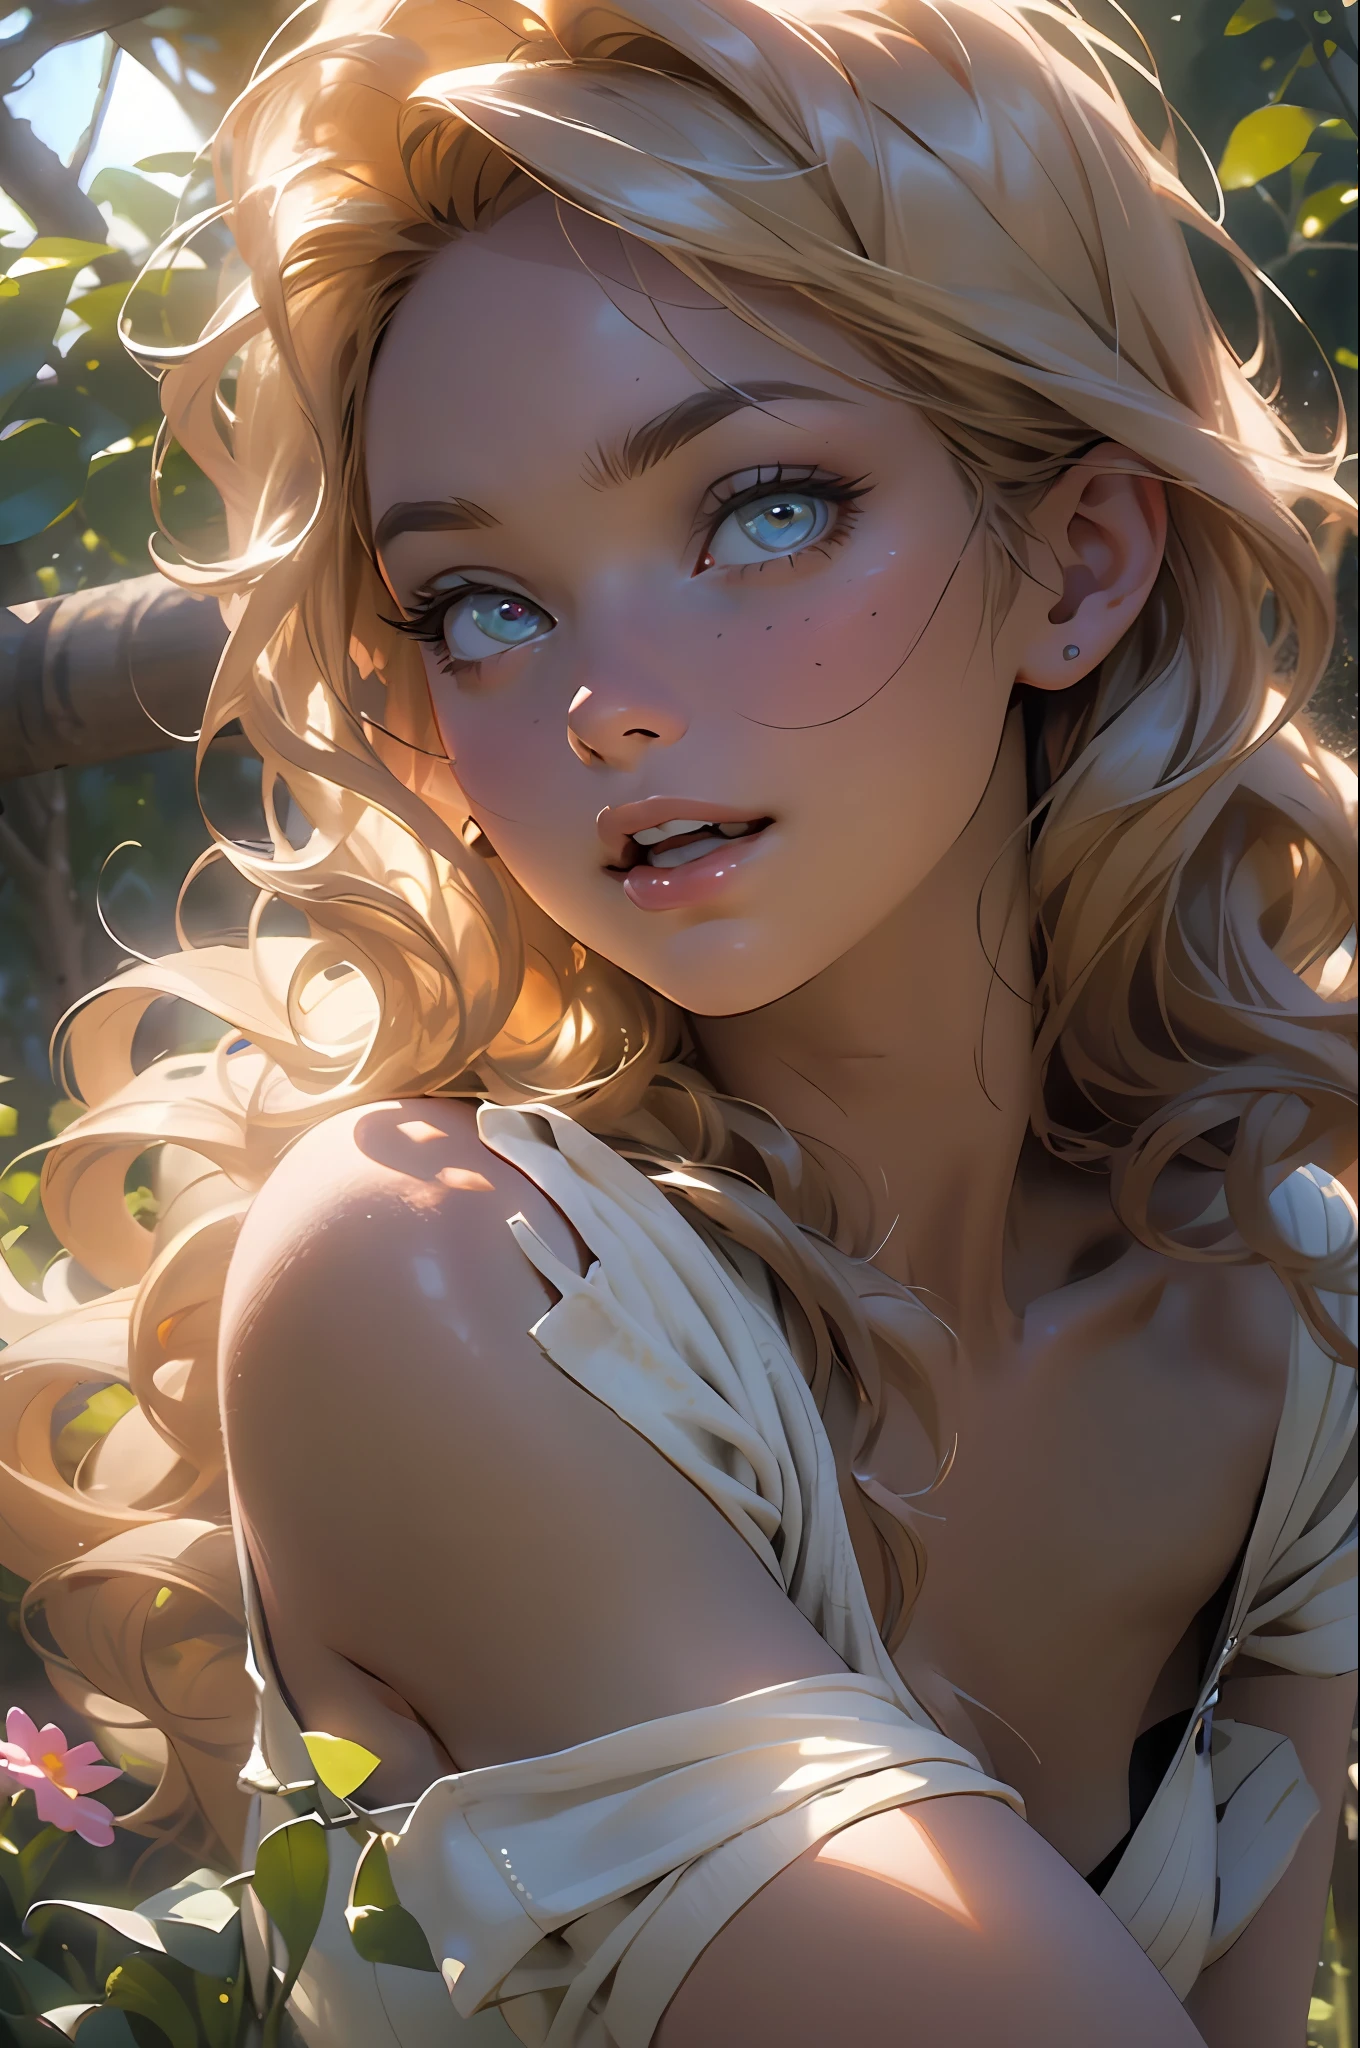 melancholy lighting, quiet, calm, brightness, masterpiece, best quality, 1girl, (JinxLol:1.2), (ultra photorealistic:1.3), (masterpiece:1.4), best quality, ((realistic)), high quality, ultra detailed, ((Real image)), ((realistic skin)), ((realistic face)),(illustration:1.05), (beautiful:1.05), (beautiful detailed eyes:1.05), (cinematic light:1.1), Full body, precise proportions, 18-year-old girl, skinny model lying on the grass, surrounding garden,  tree shadow, GINGER BLONDIE hair fluttering in the wind, tulle, long legs, slightly open feet, buttocks, blush, shyness, collarbone, abdominals, double weave, beautiful and delicate face, fair skin, real skin, (face detail), pores, super high resolution, 8k, parameters Best quality, masterpiece, super high resolution, (Realistic 2.0), More details, detailed skin, transparent RED panties, wide smile, white teeth,  GINGER BLONDIE hair voluminous, perfect and well designed eyes, girlfriend, beautiful, beautiful, flowers, studio lighting